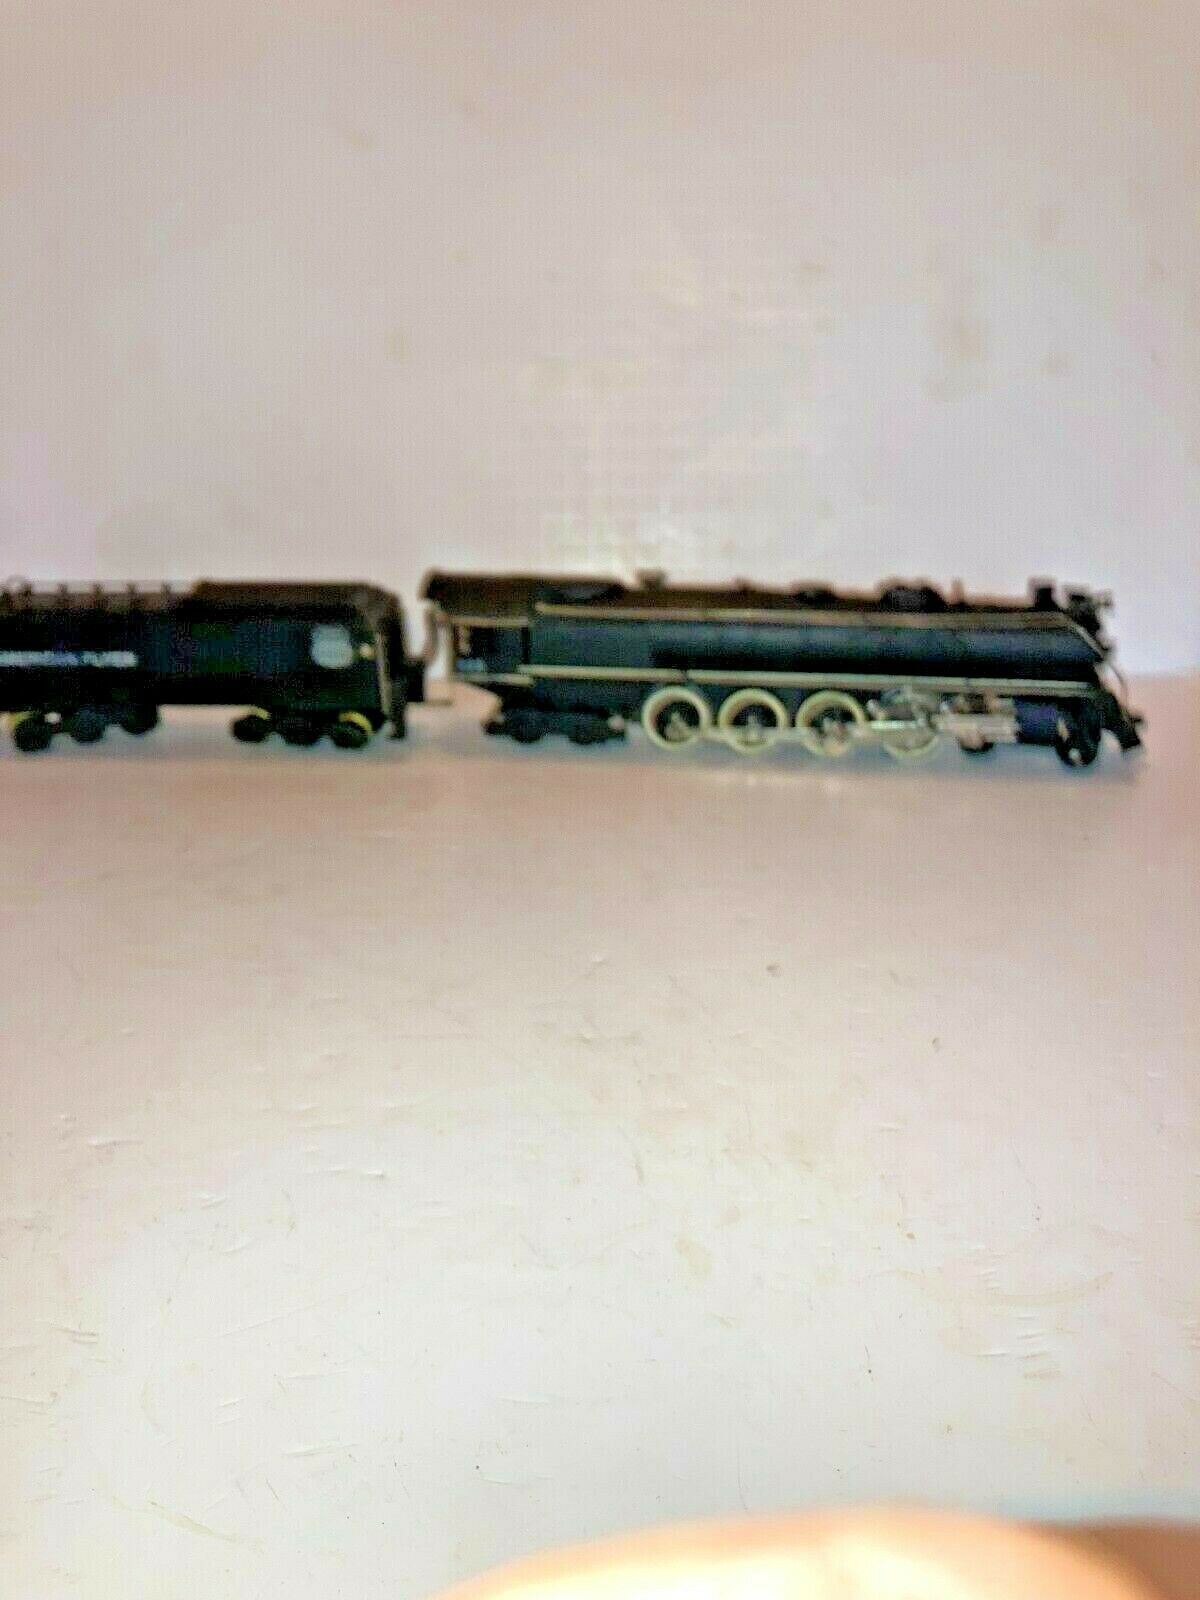 American Flyer S Scale Challenger Loco & Tender #332 Dc 4-8-4 Union Pacific,runs